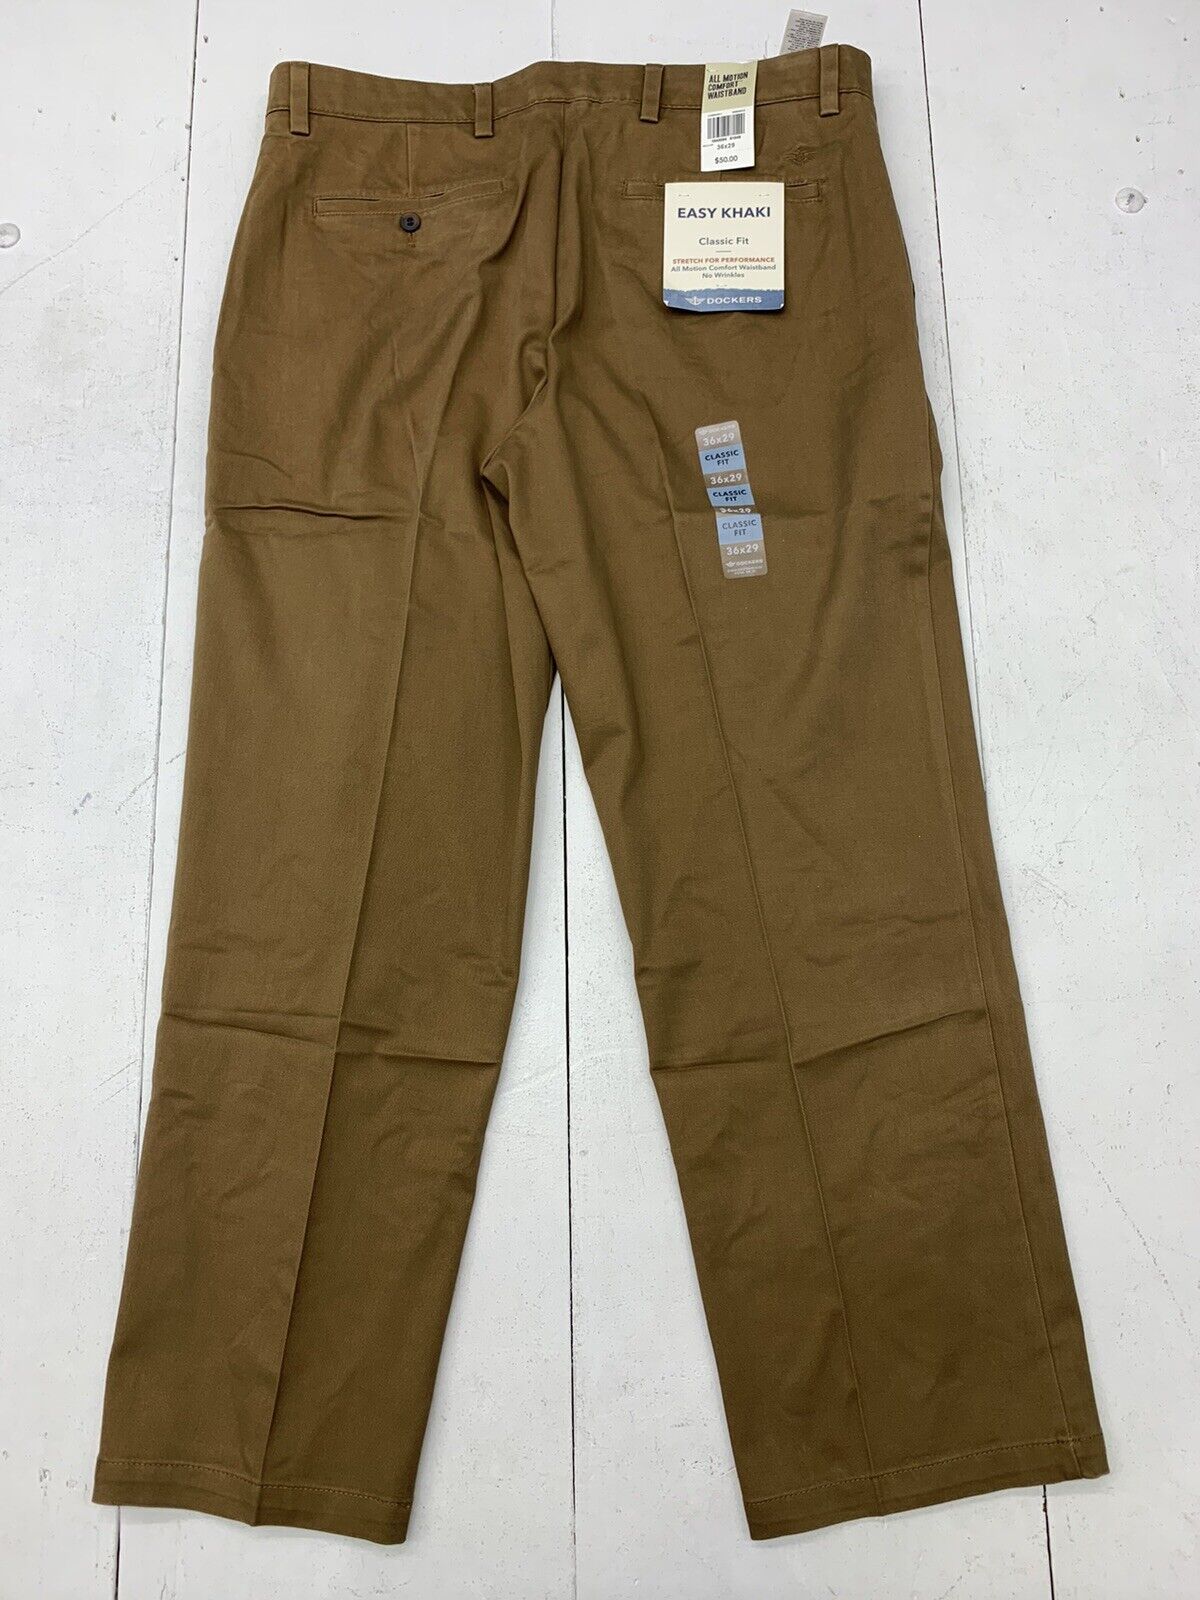 Men's Dockers All Motion Comfort Waistband Pant, Size 32 x 32